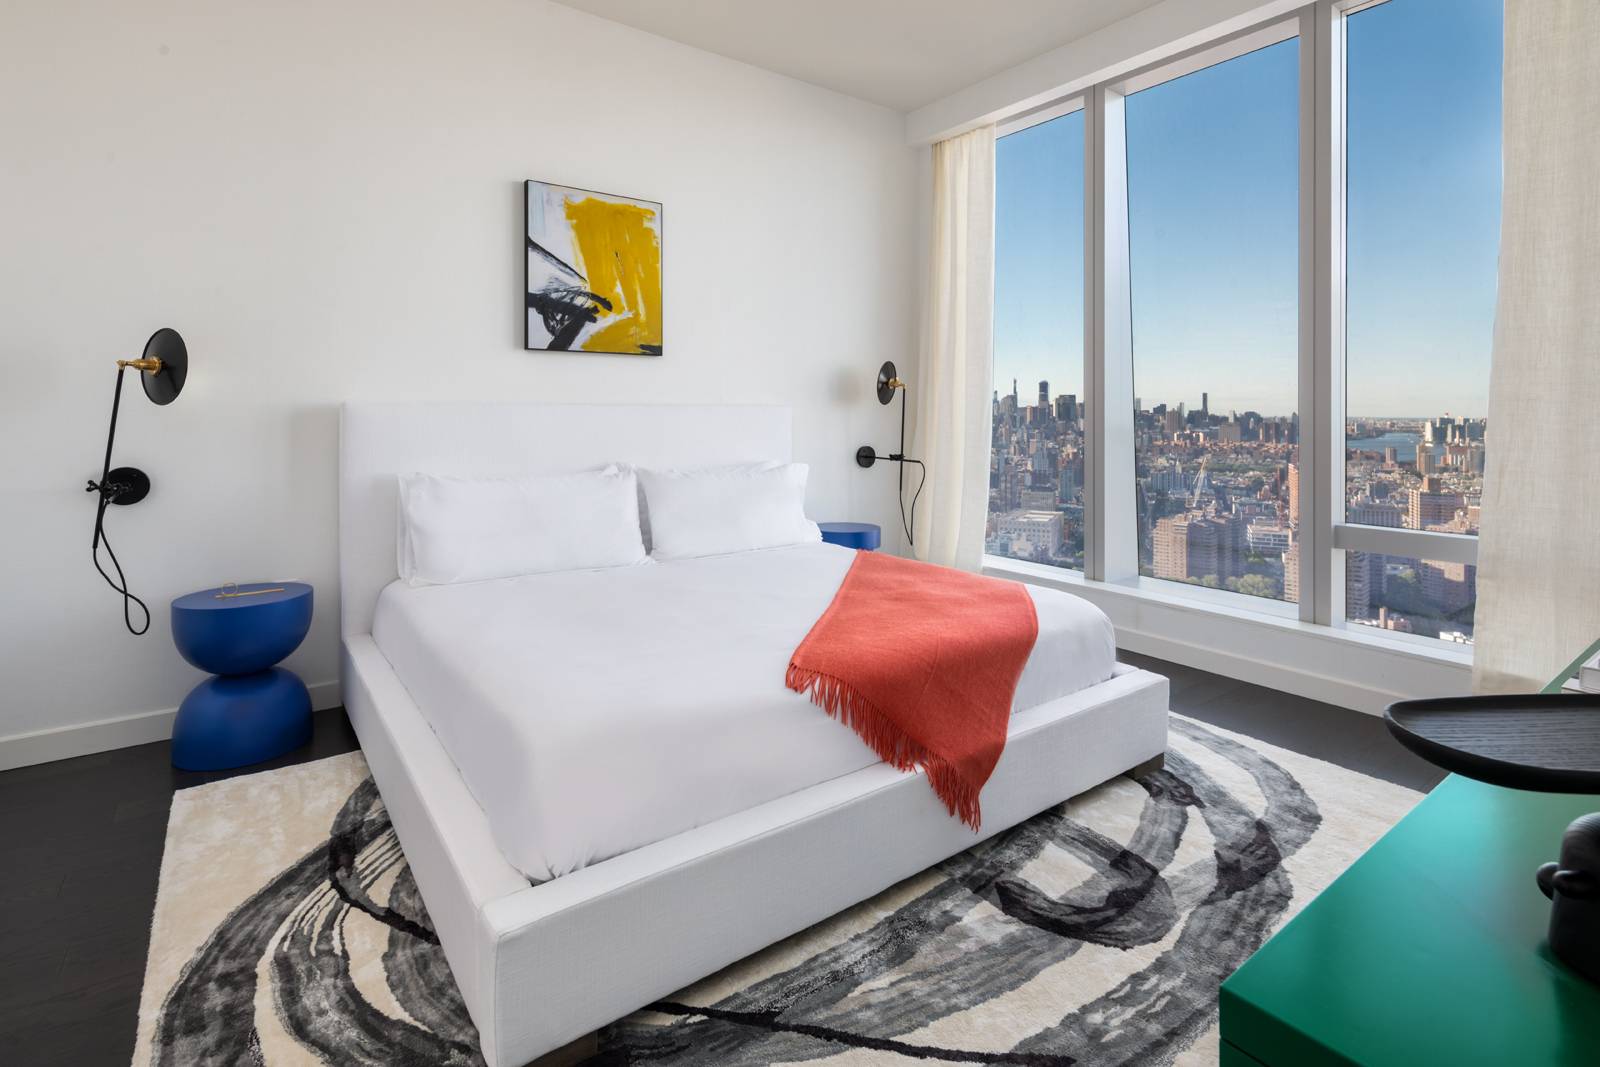 ONE MANHATTAN SQUARE OFFERS ONE OF THE LAST 20 YEAR TAX ABATEMENTS AVAILABLE IN NEW YORK CITY Residence 62D is a 1, 170 square foot two bedroom, two bathroom with ...